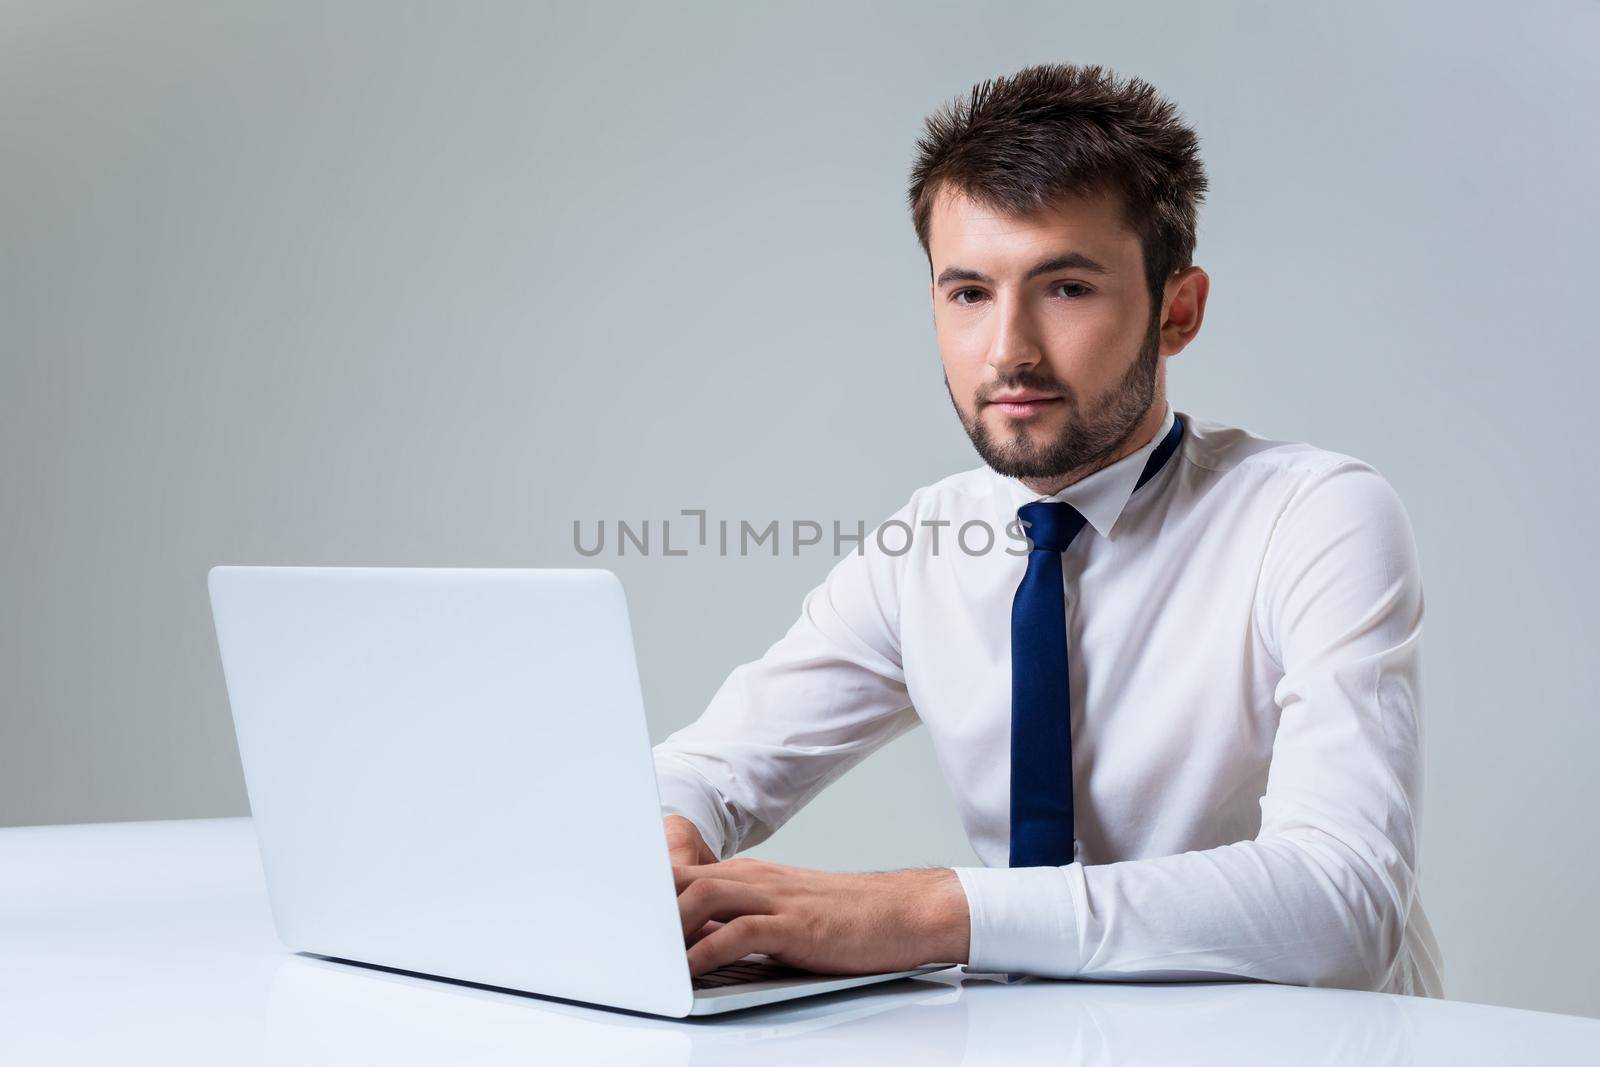 young man smiling at the camera uses a laptop computer while sitting at a table. Office clothing